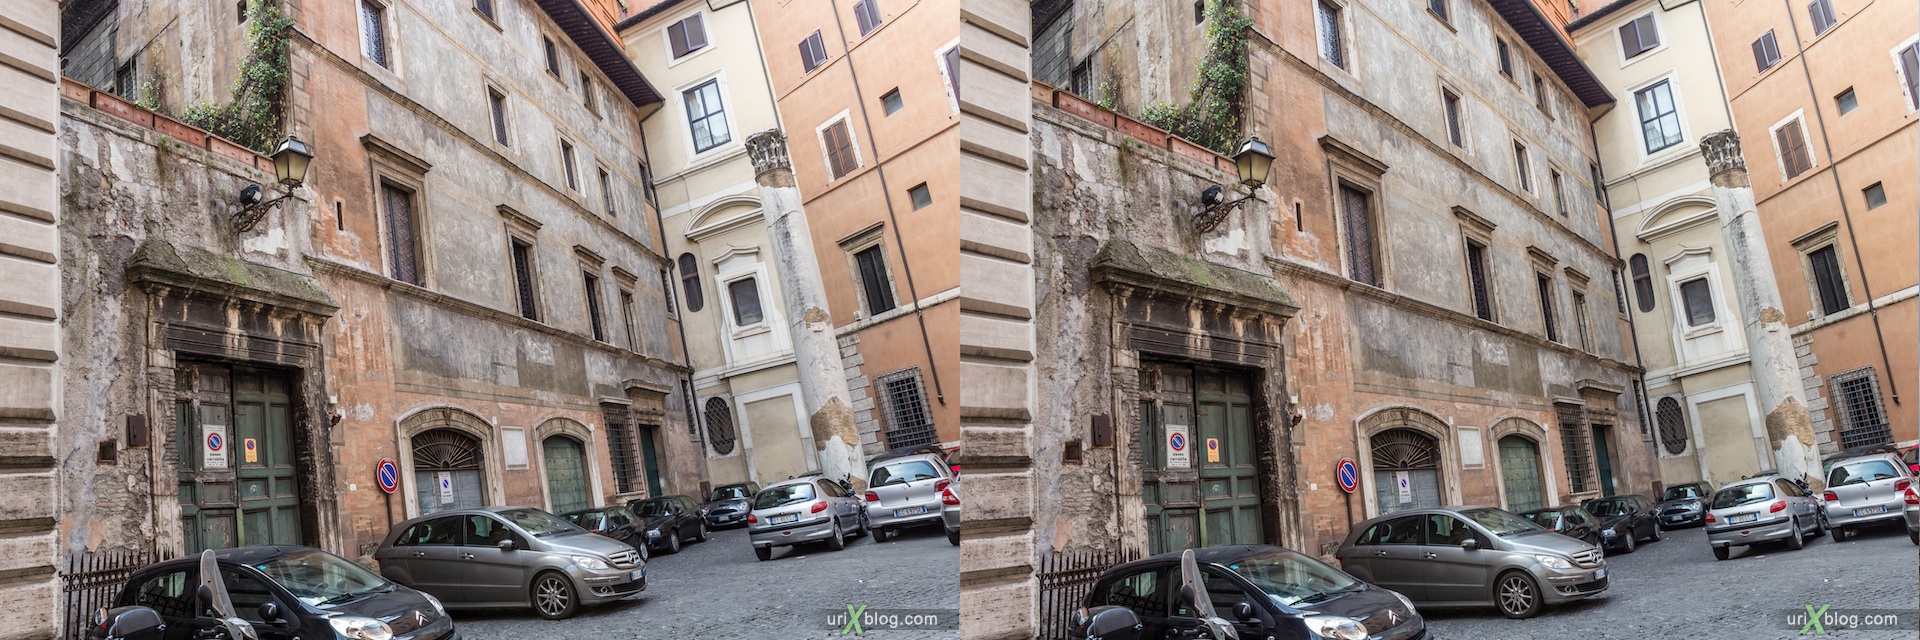 2012, piazza dei Massimi, palazzo Massimi, Rome, Italy, 3D, stereo pair, cross-eyed, crossview, cross view stereo pair